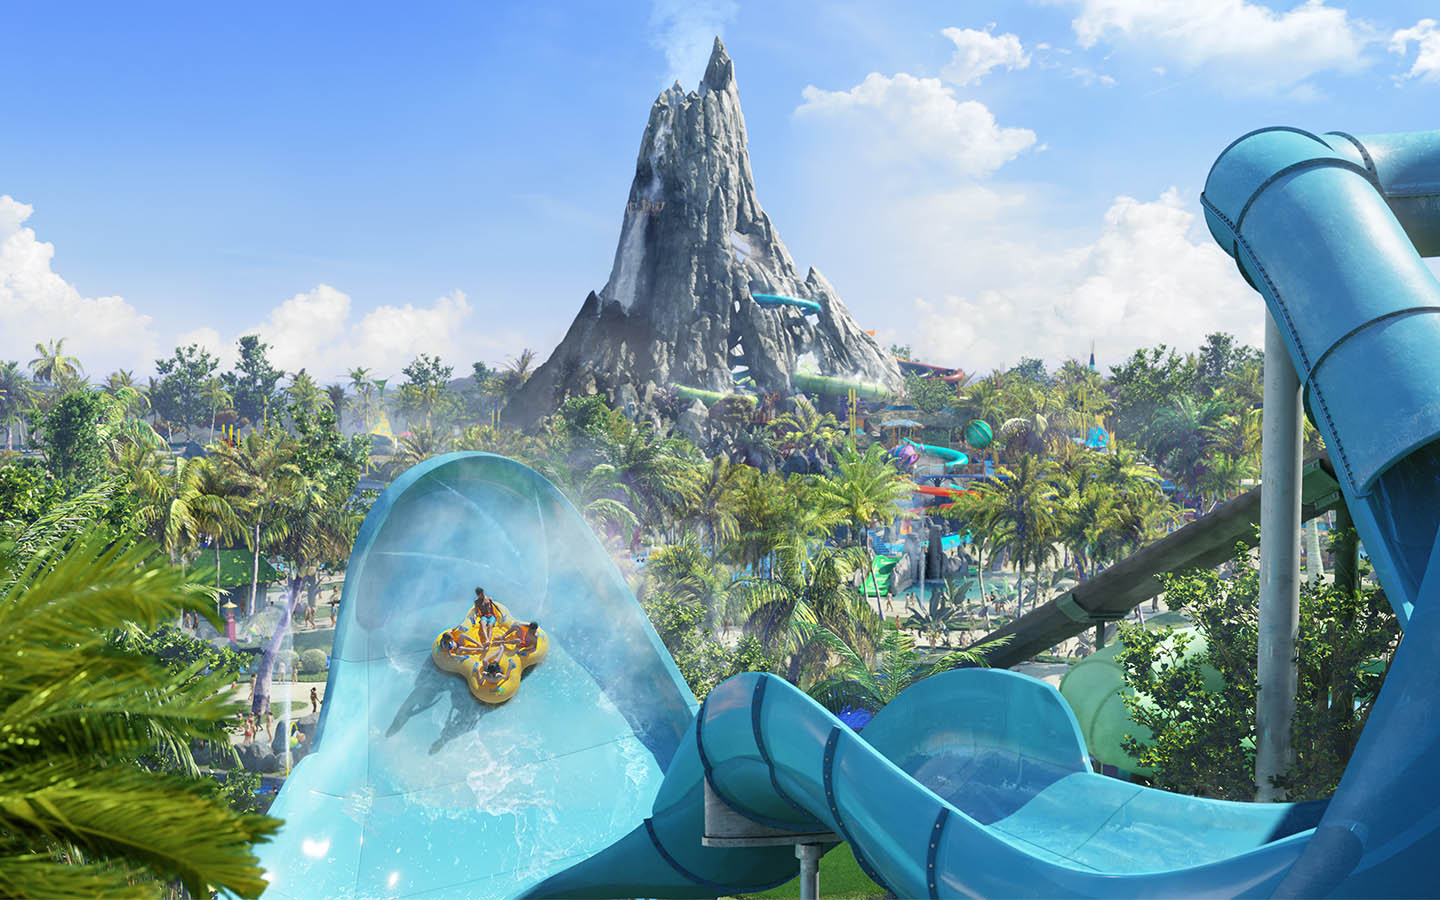 First-ever details revealed for Universal's Volcano Bay, including Honu - an adventurous, multi-passenger raft ride that will soar across two giant, sloped walls.